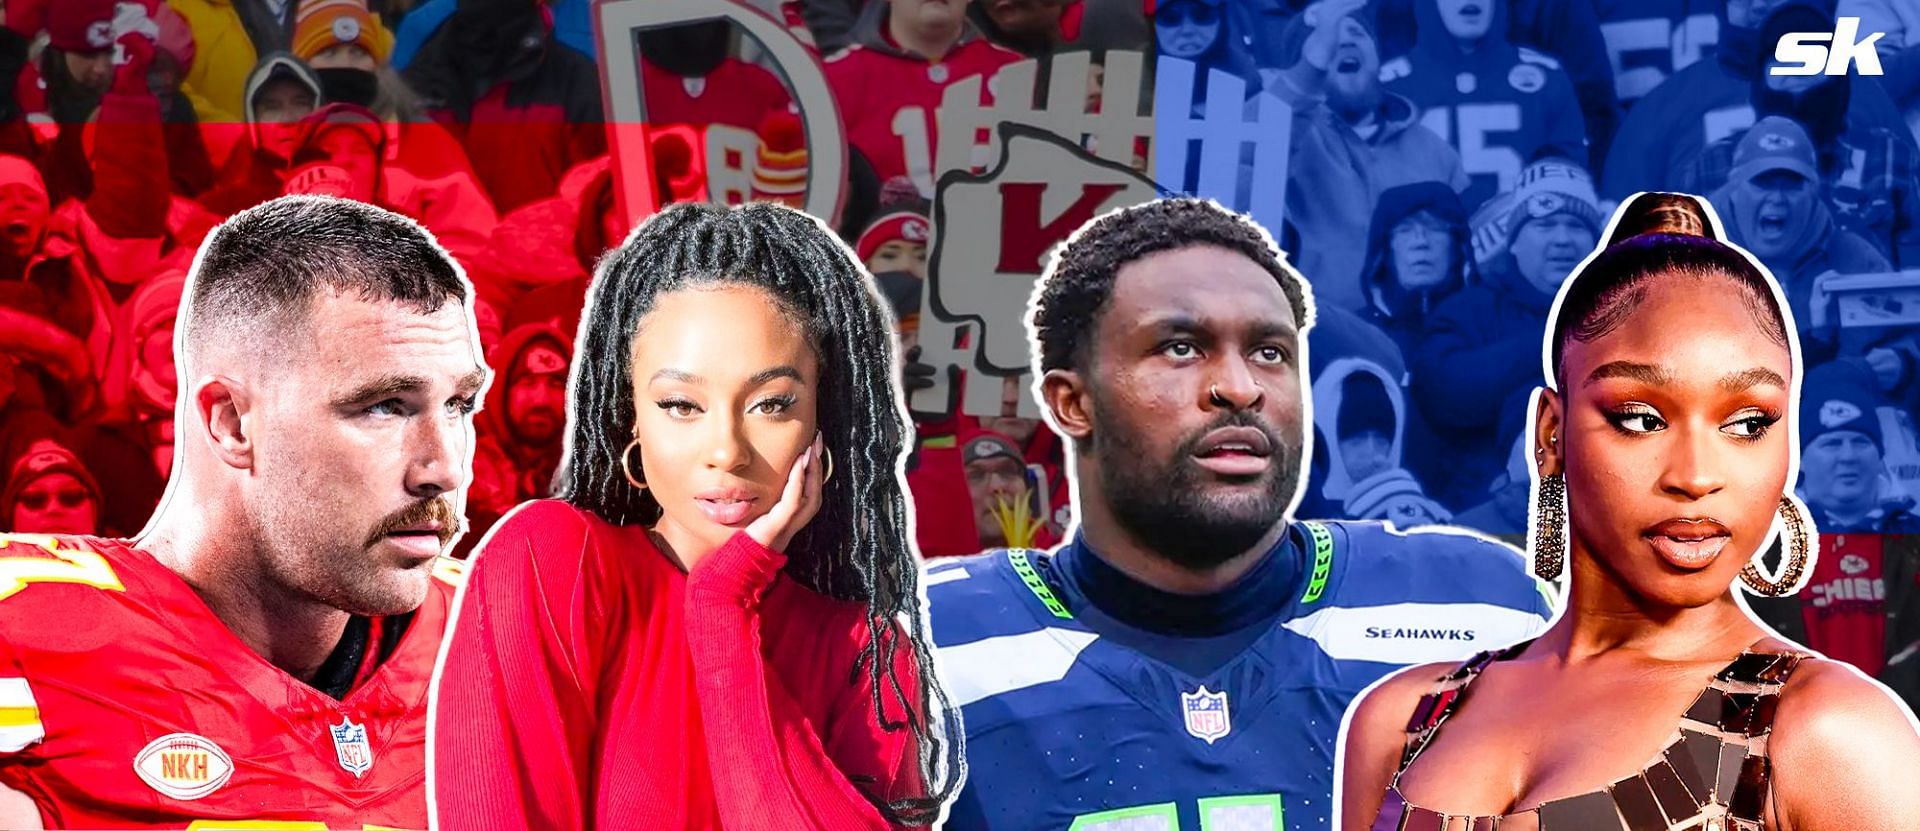 Travis Kelce&rsquo;s ex-GF Kayla Nicole&rsquo;s message on &lsquo;silencing the noise&rsquo; gets DK Metcalf&rsquo;s girlfriend Normani&rsquo;s approval